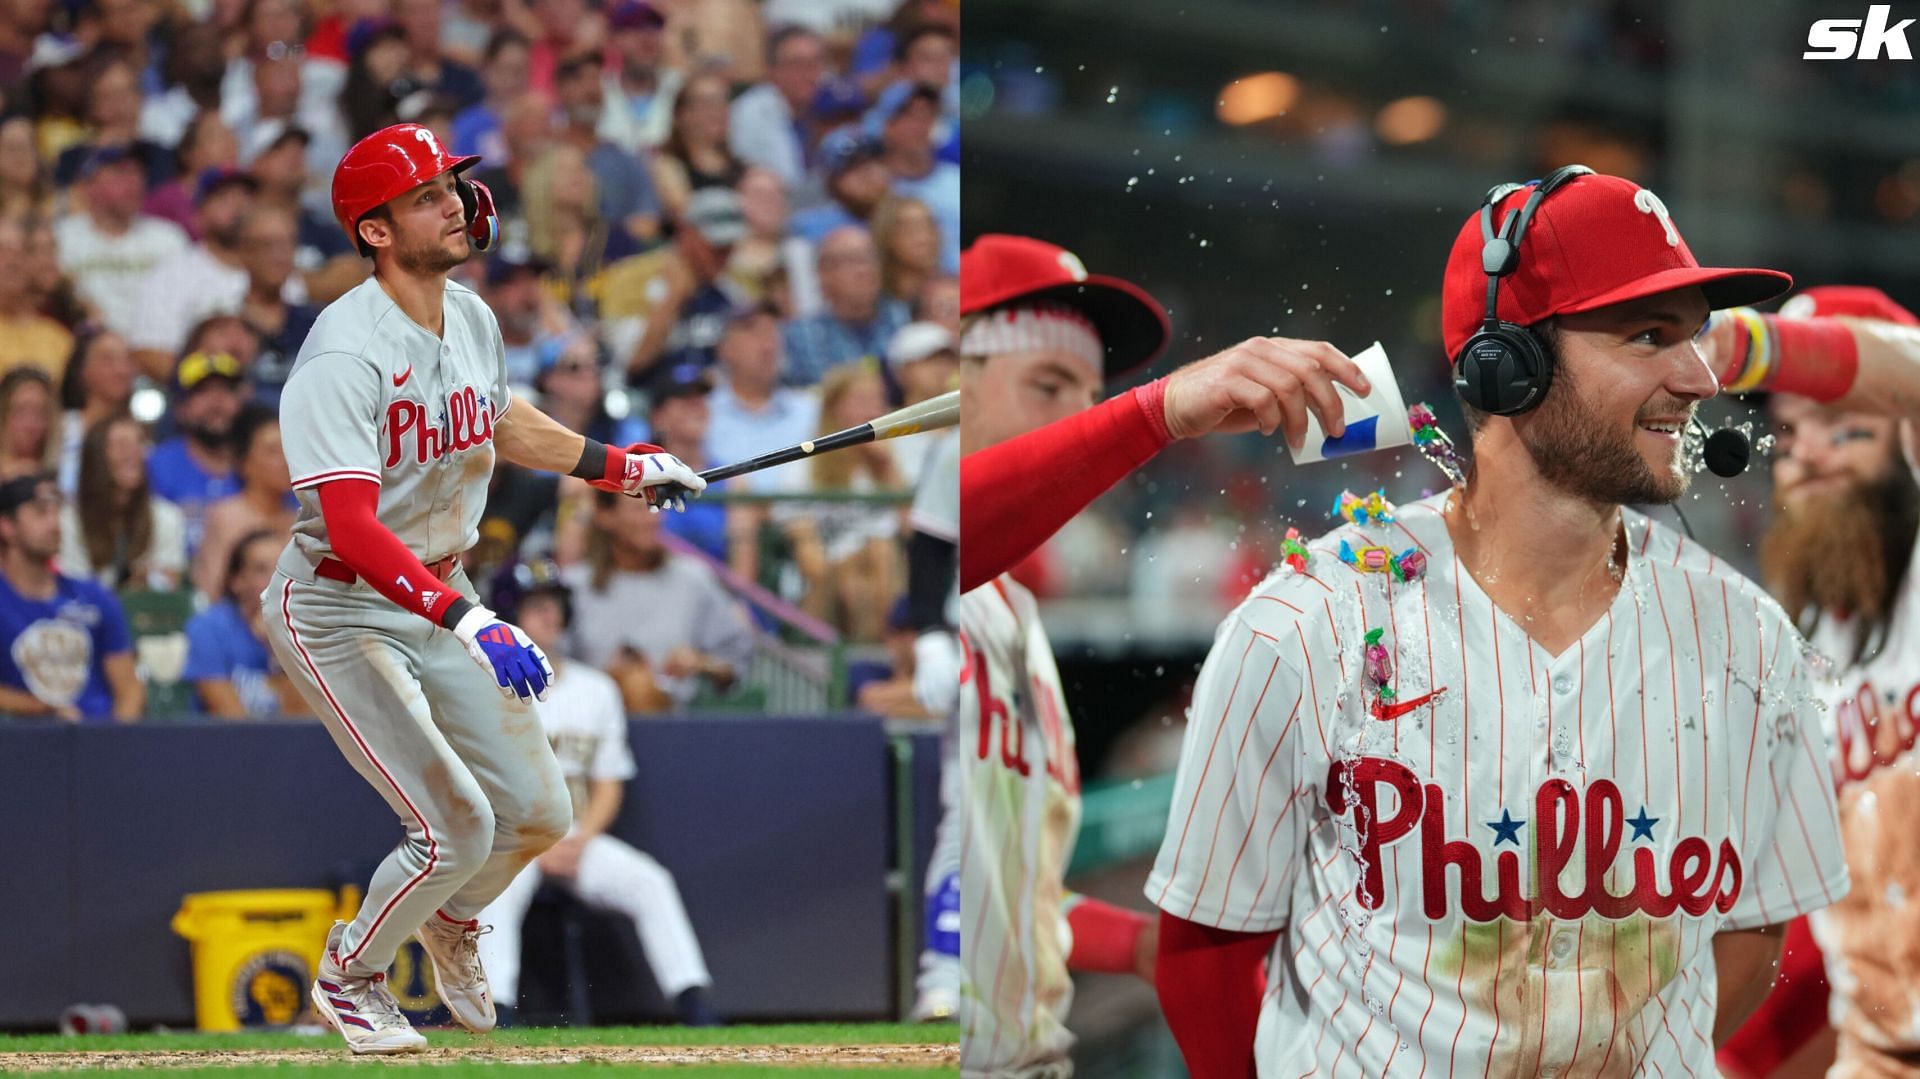 The Phillies say the Trea Turner ovation game sparked their